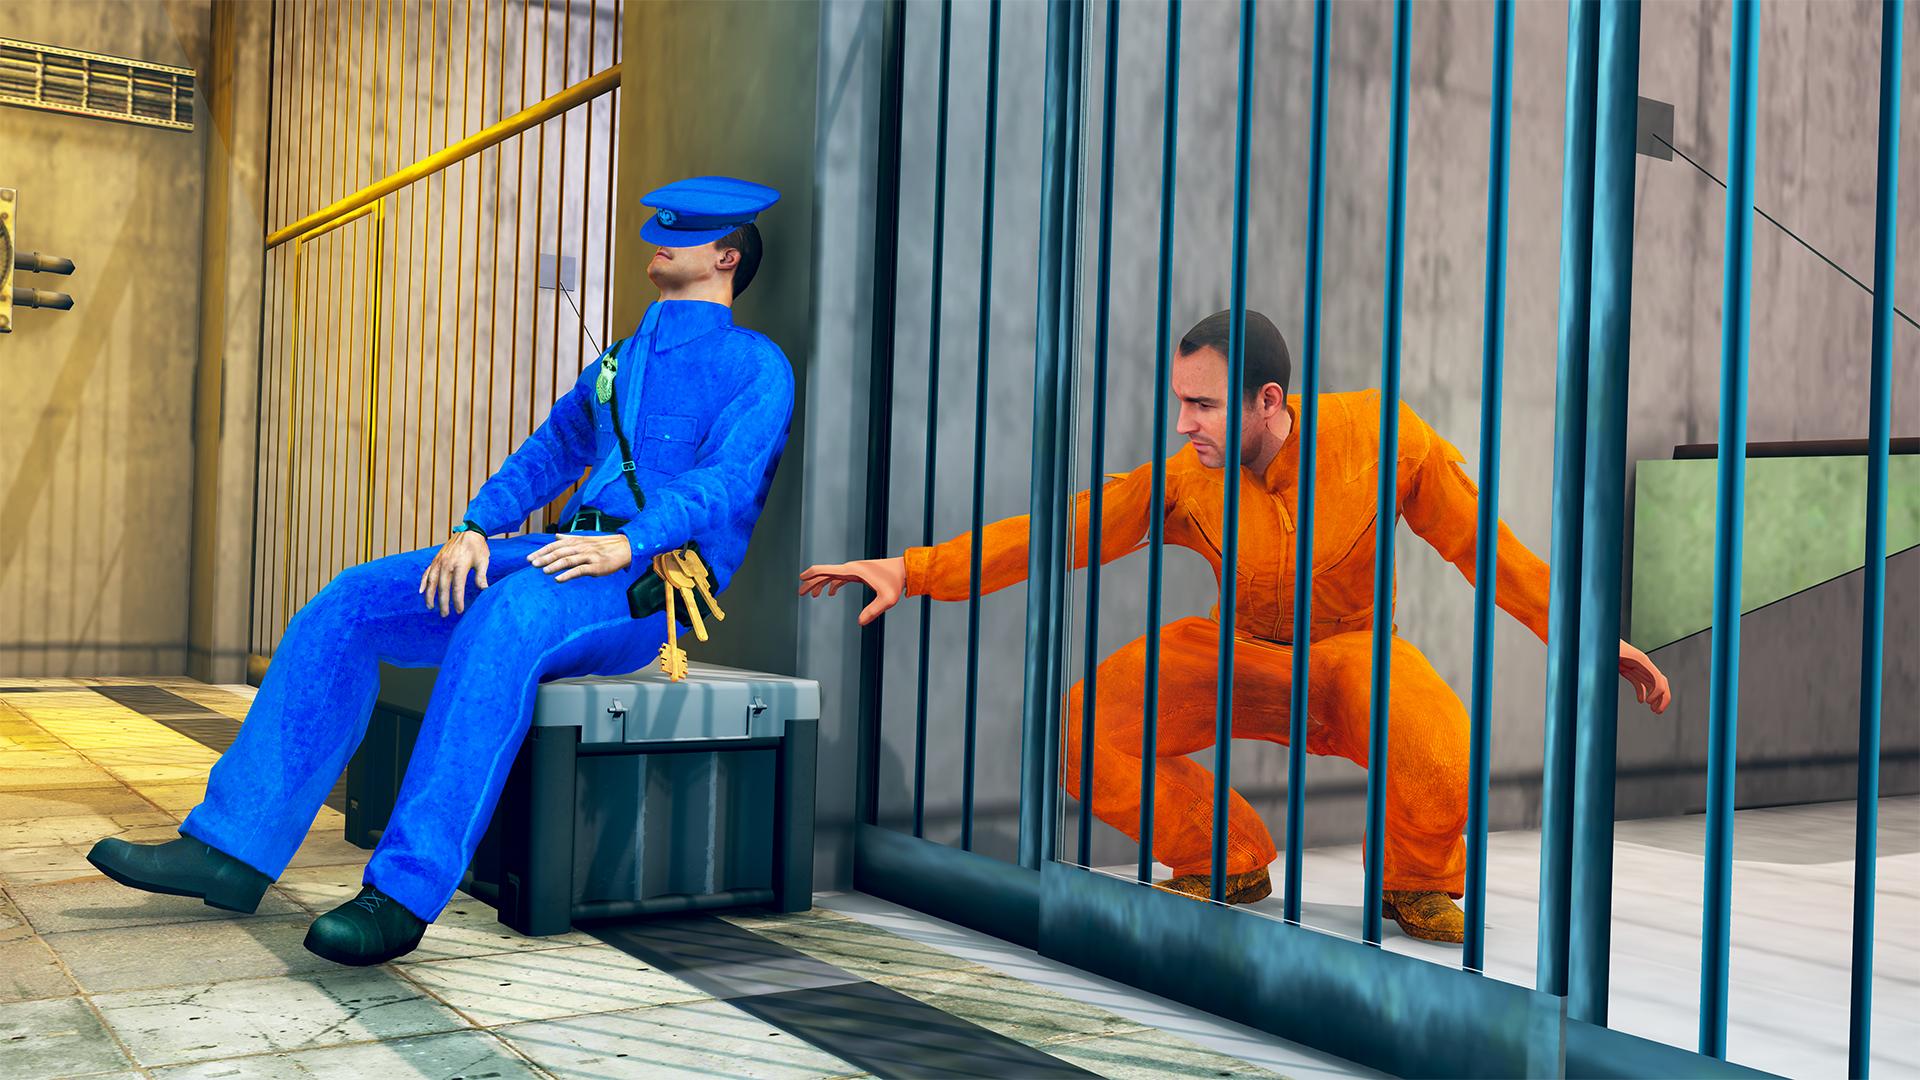 Jail Prison Escape Games for Android - Download